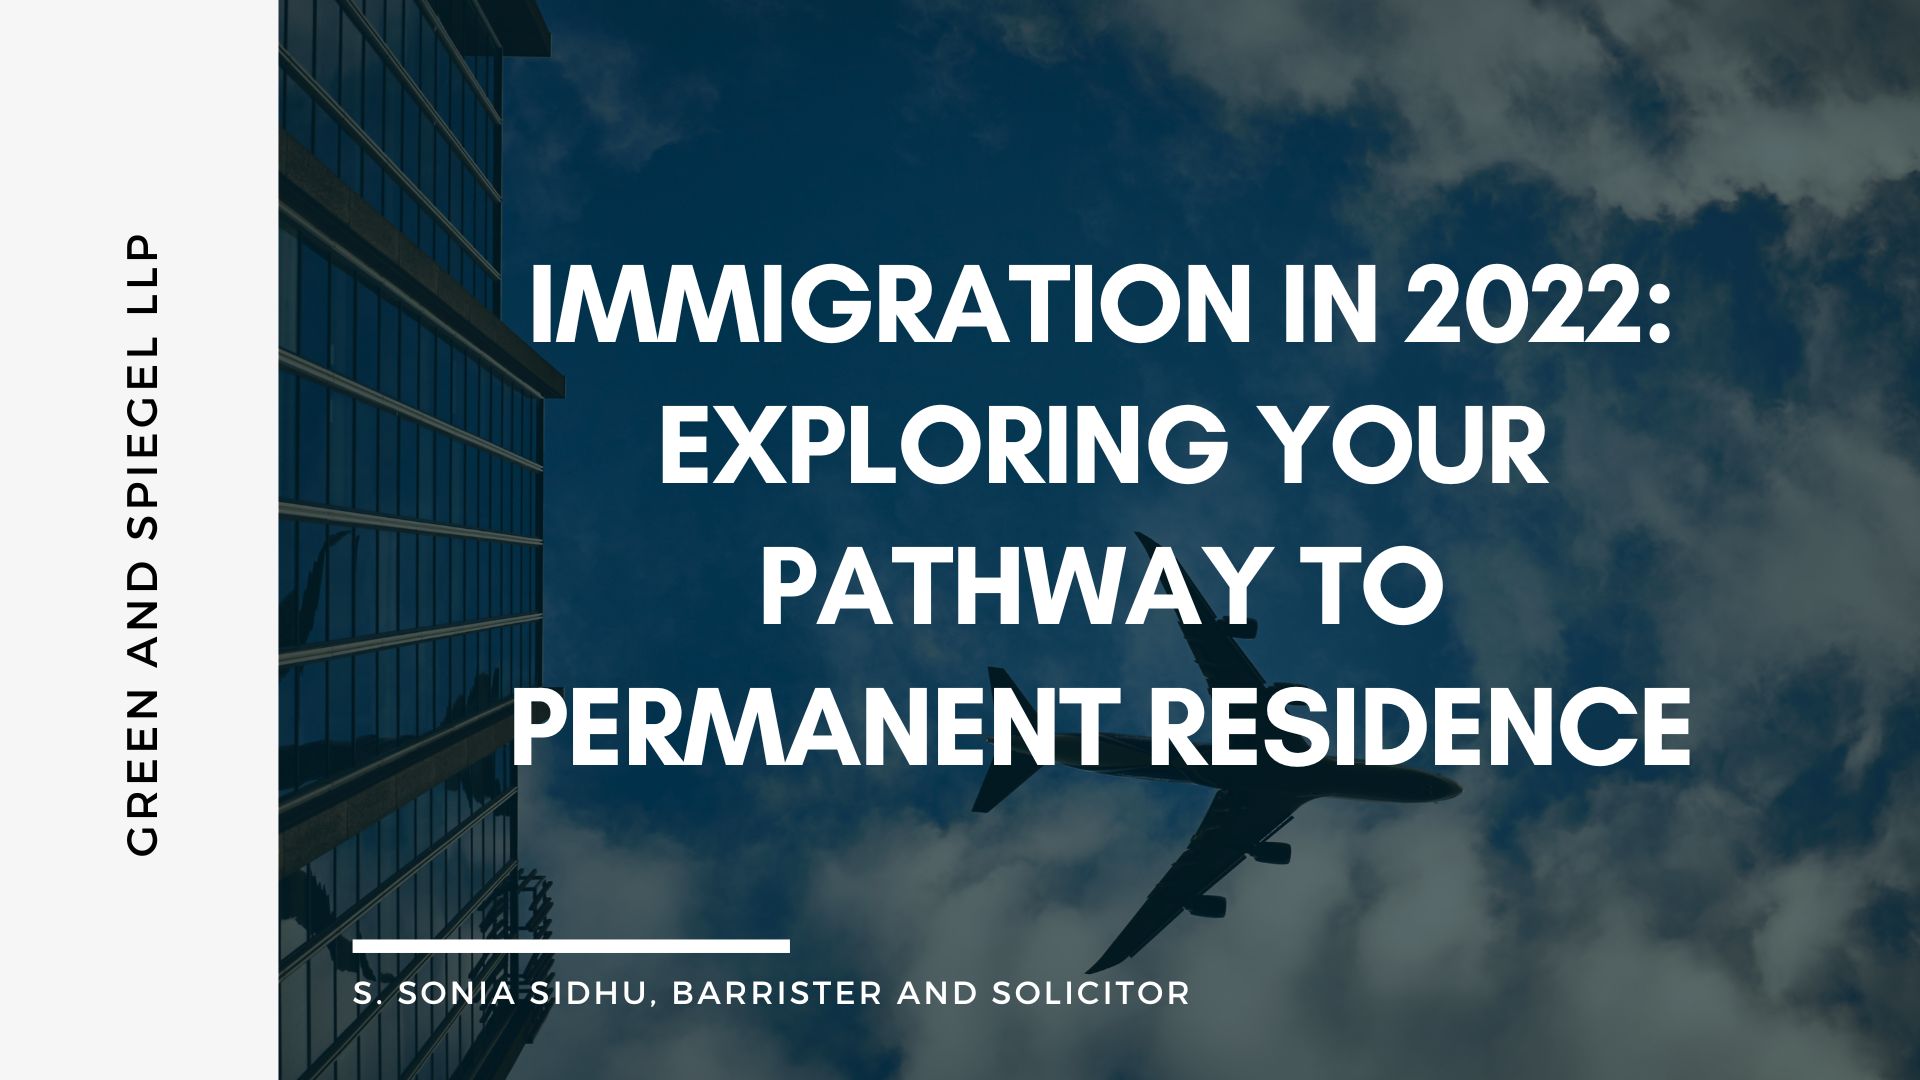 Immigration in 2022 - Exploring Your Pathway to Permanent Residence